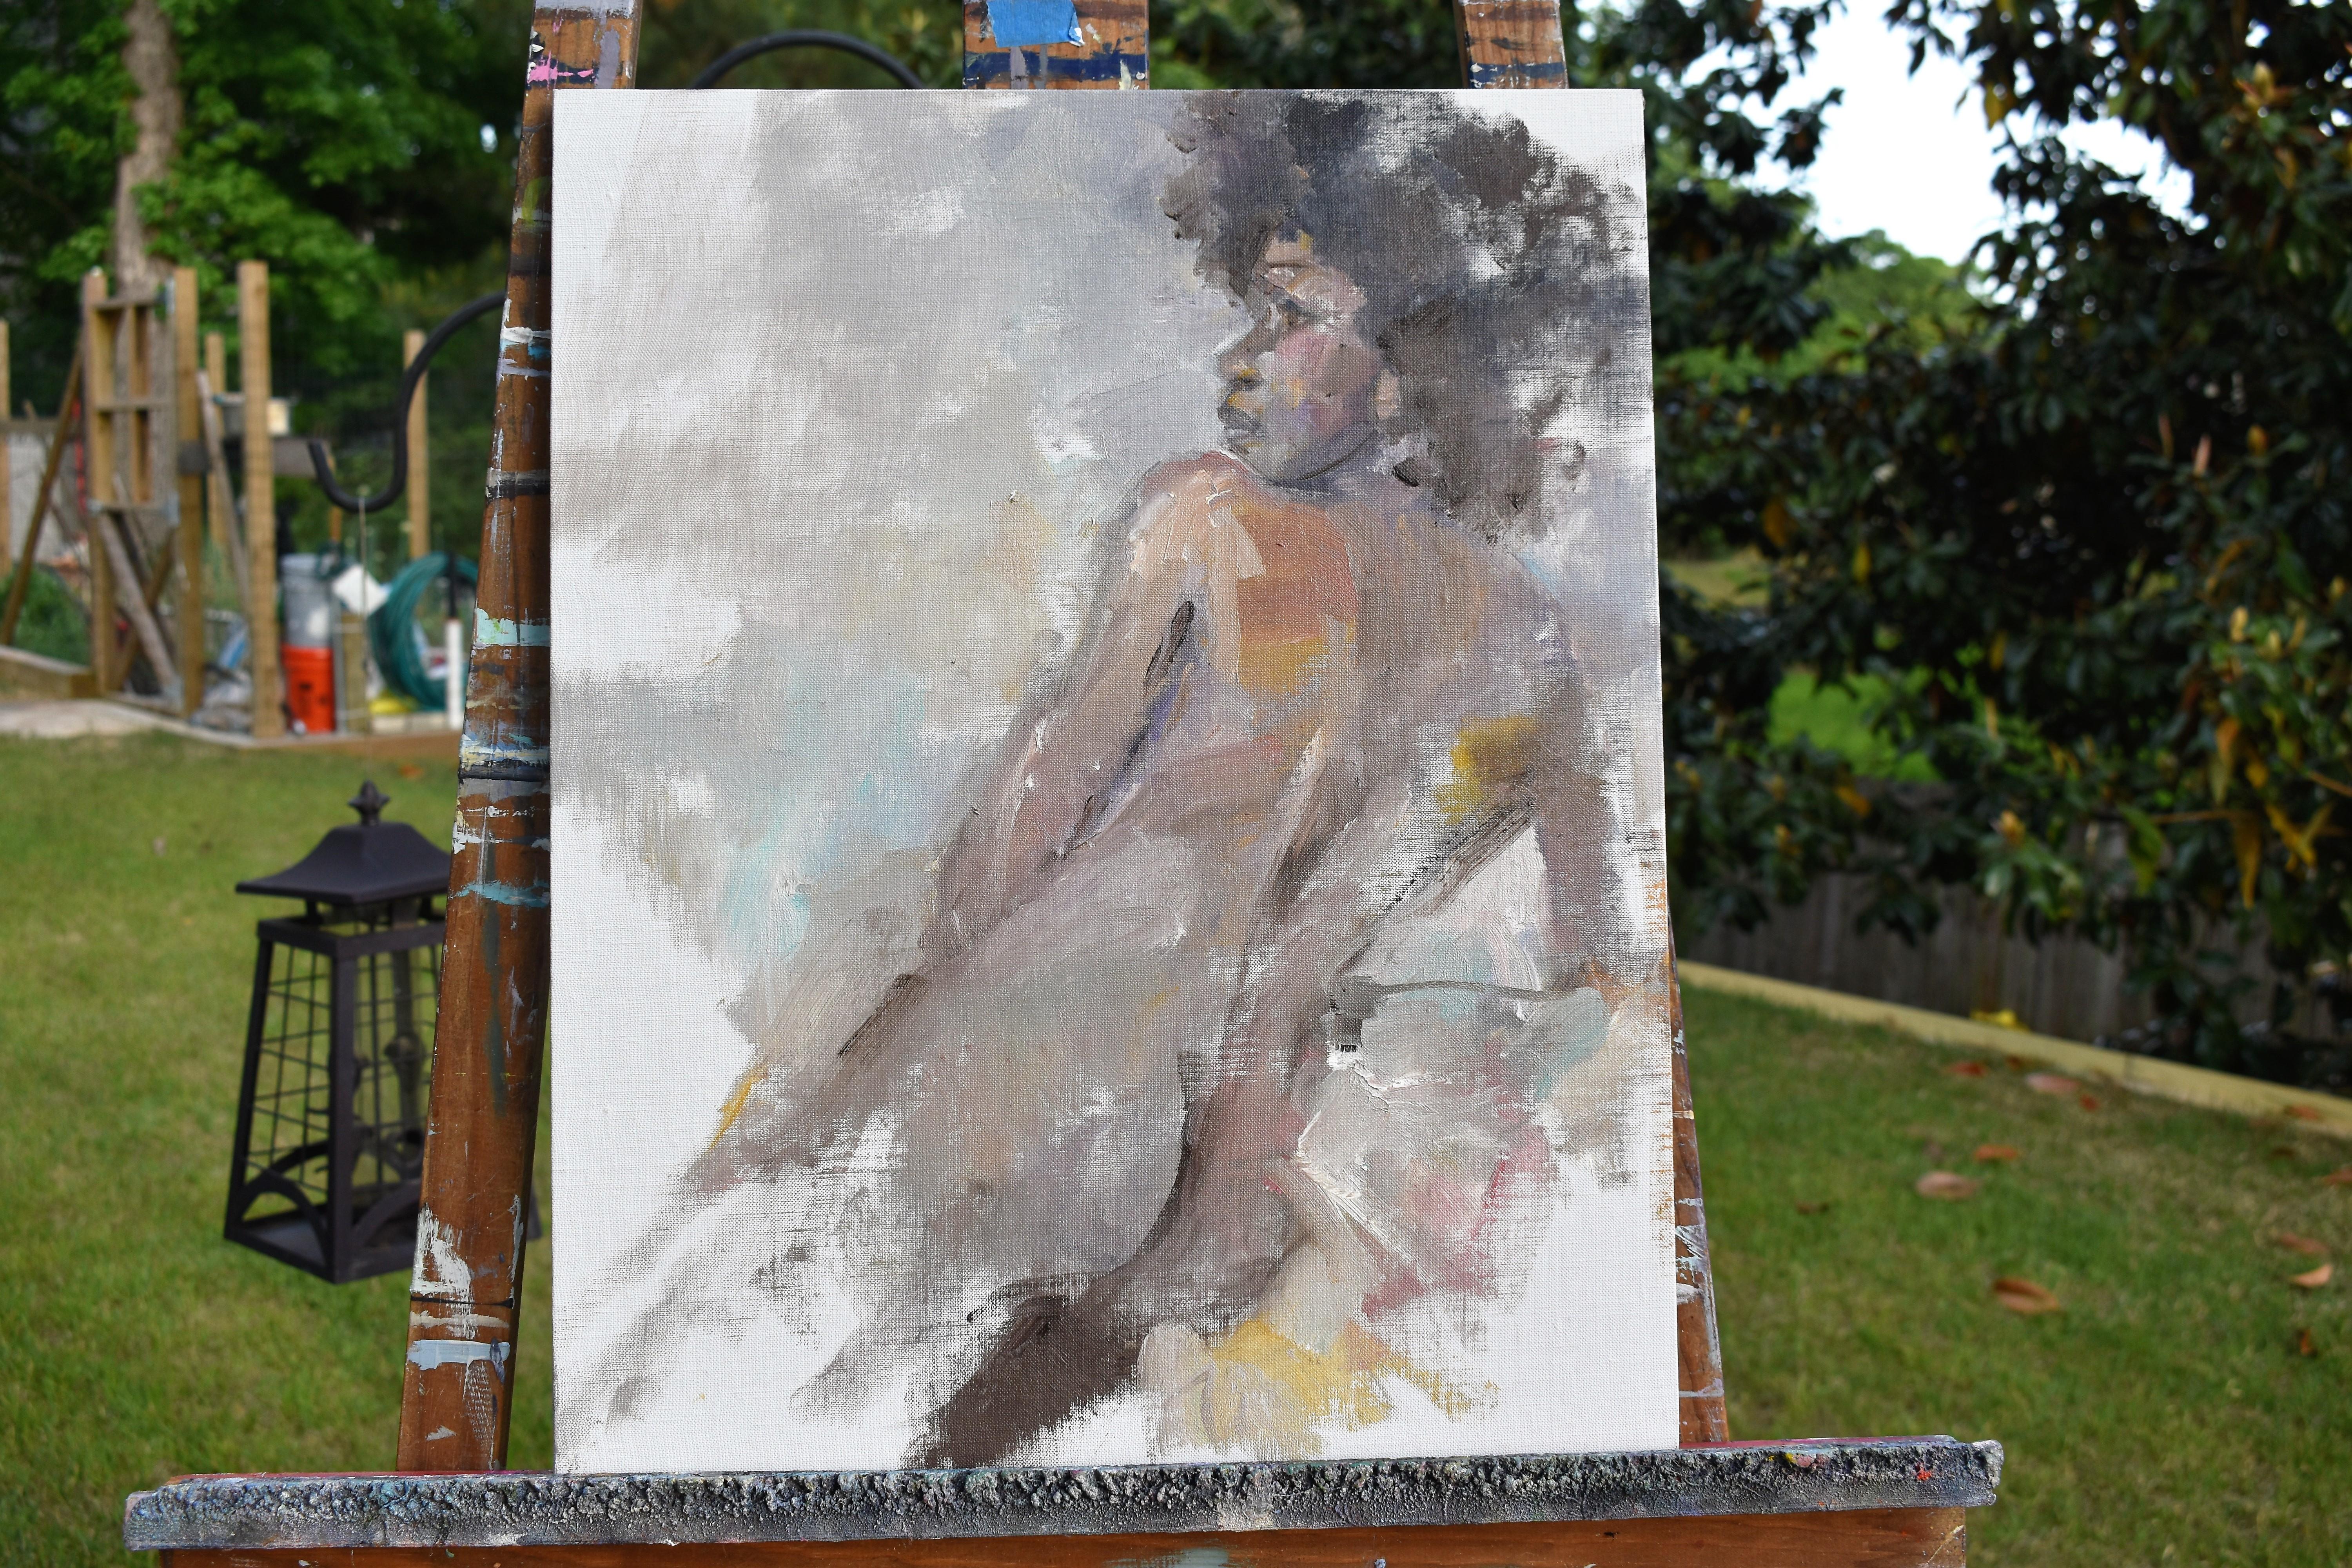 <p>Artist Comments<br>Artist Mary Pratt expresses a beautiful model posing. The subject evokes sensuality and calm, with Mary focusing on the contours of her face and back. 